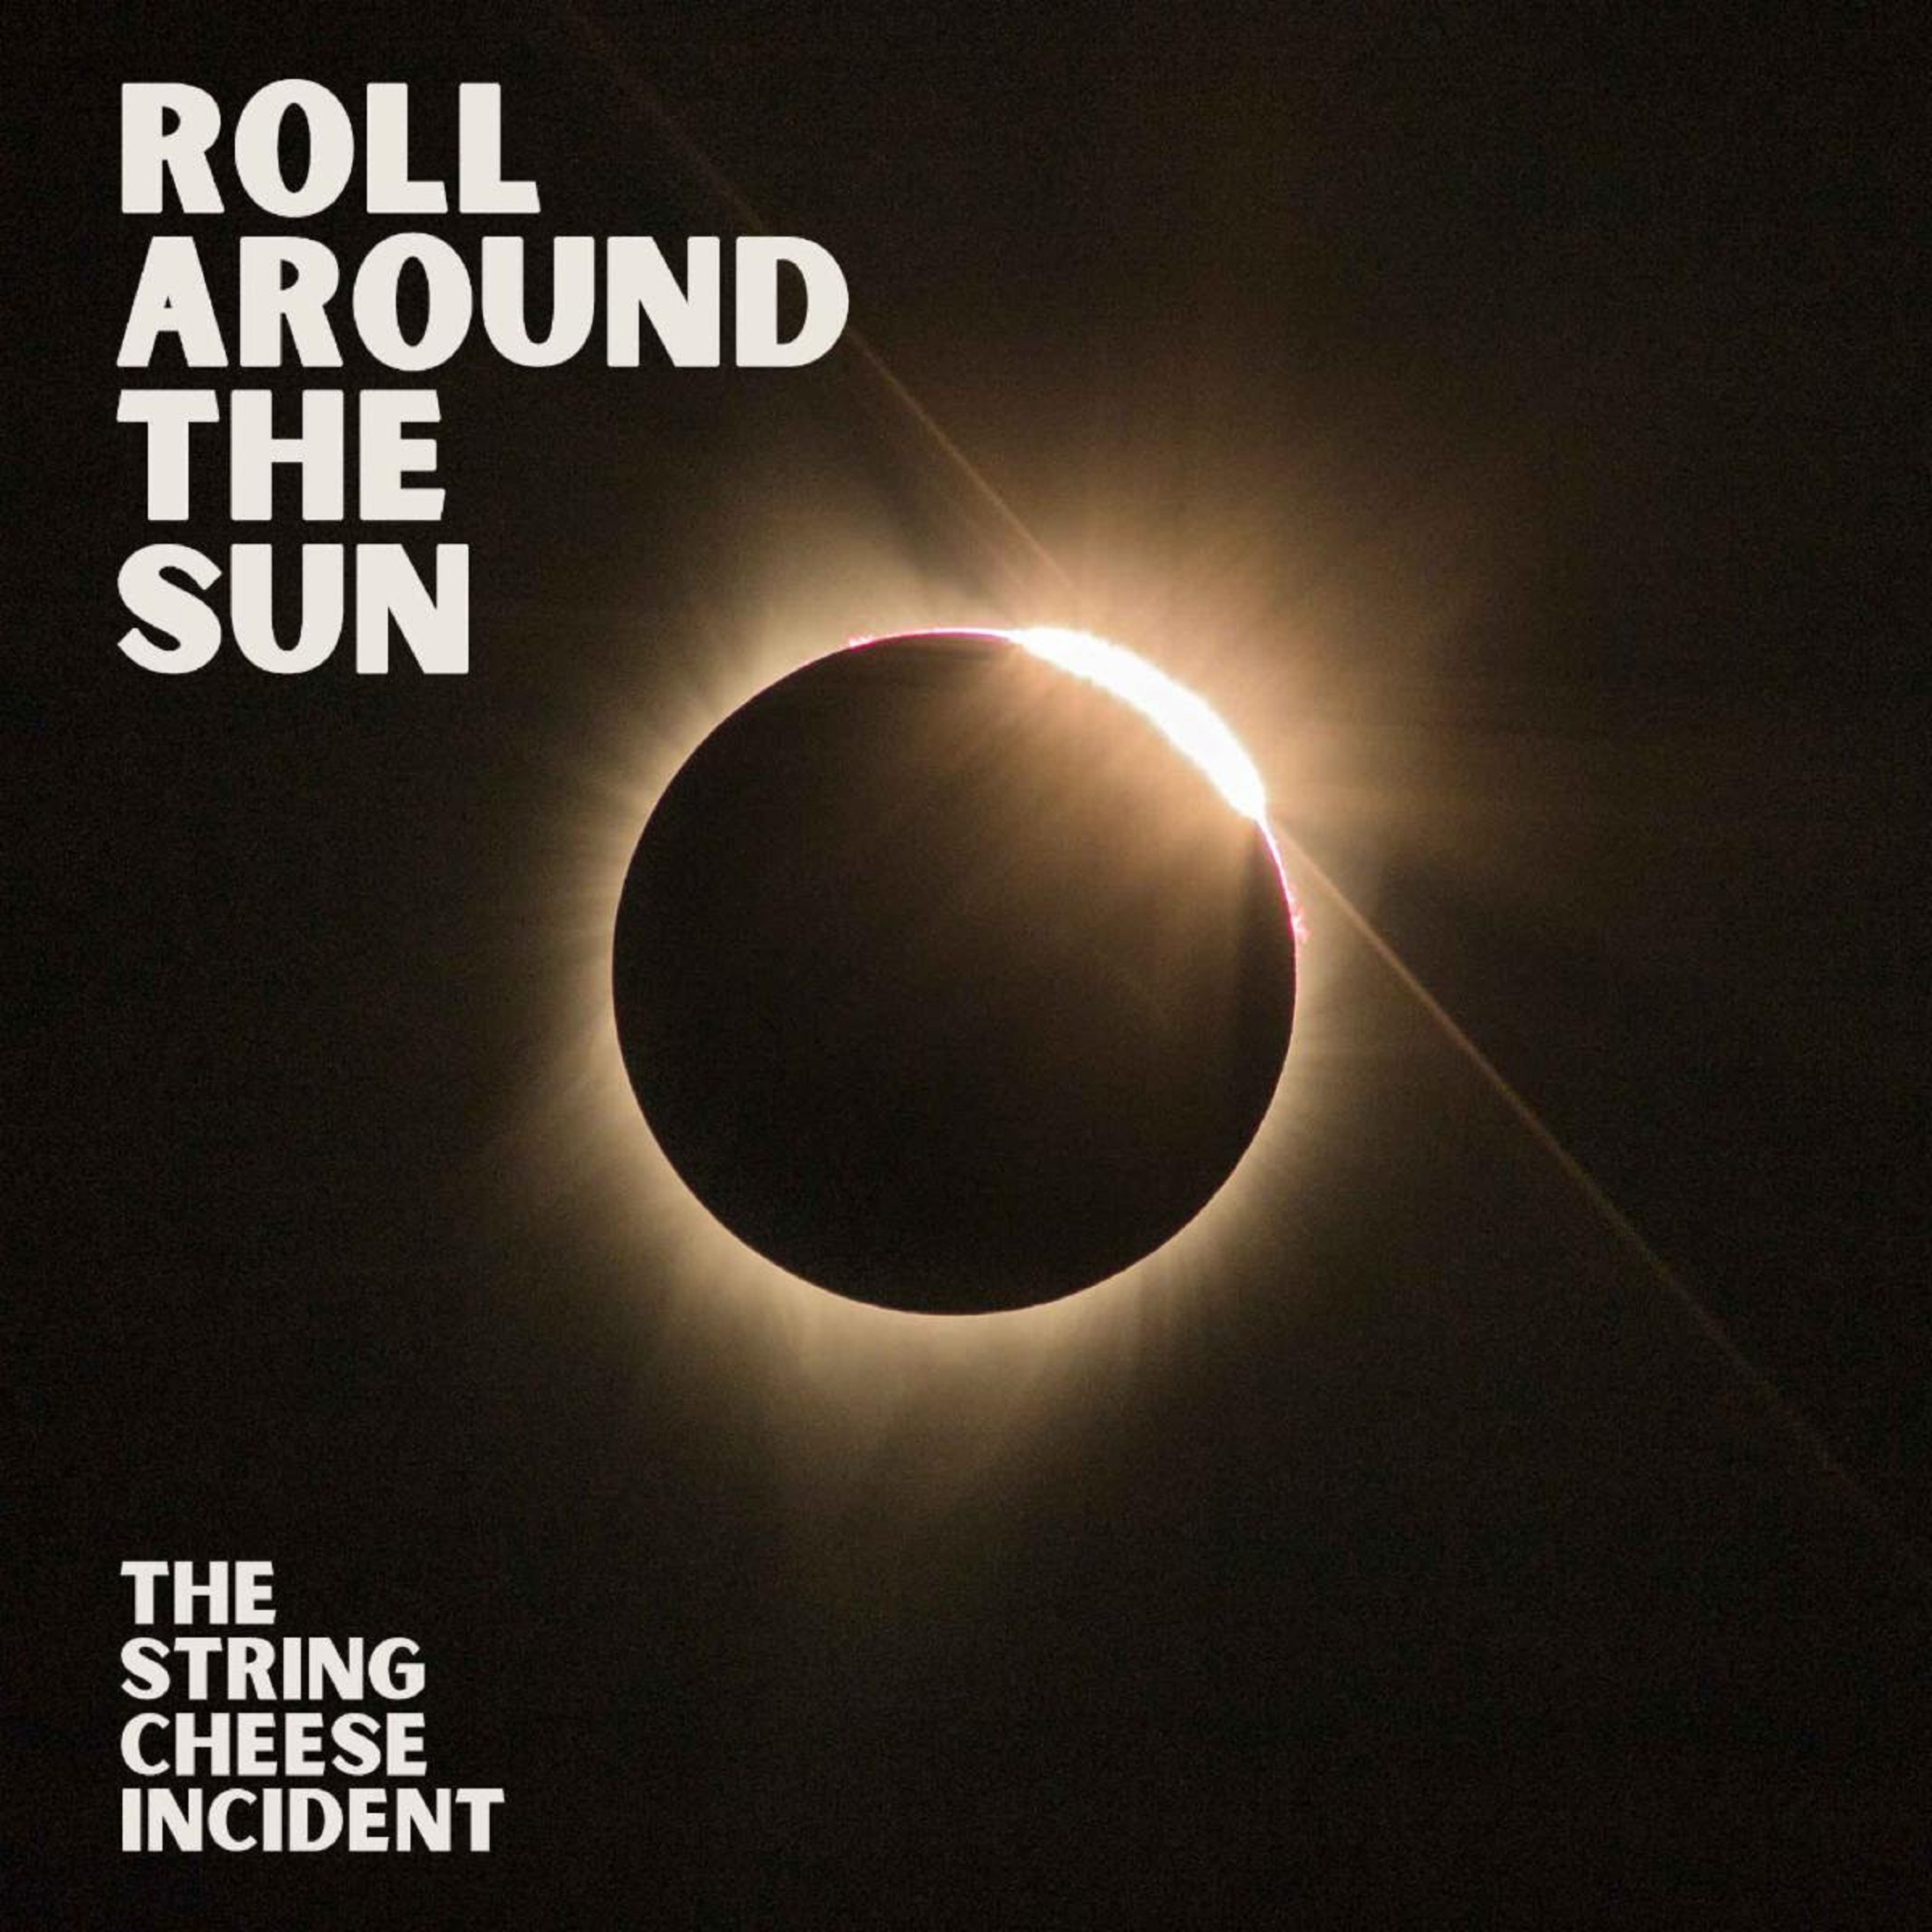 The String Cheese Incident shares new song "Roll Around The Sun"